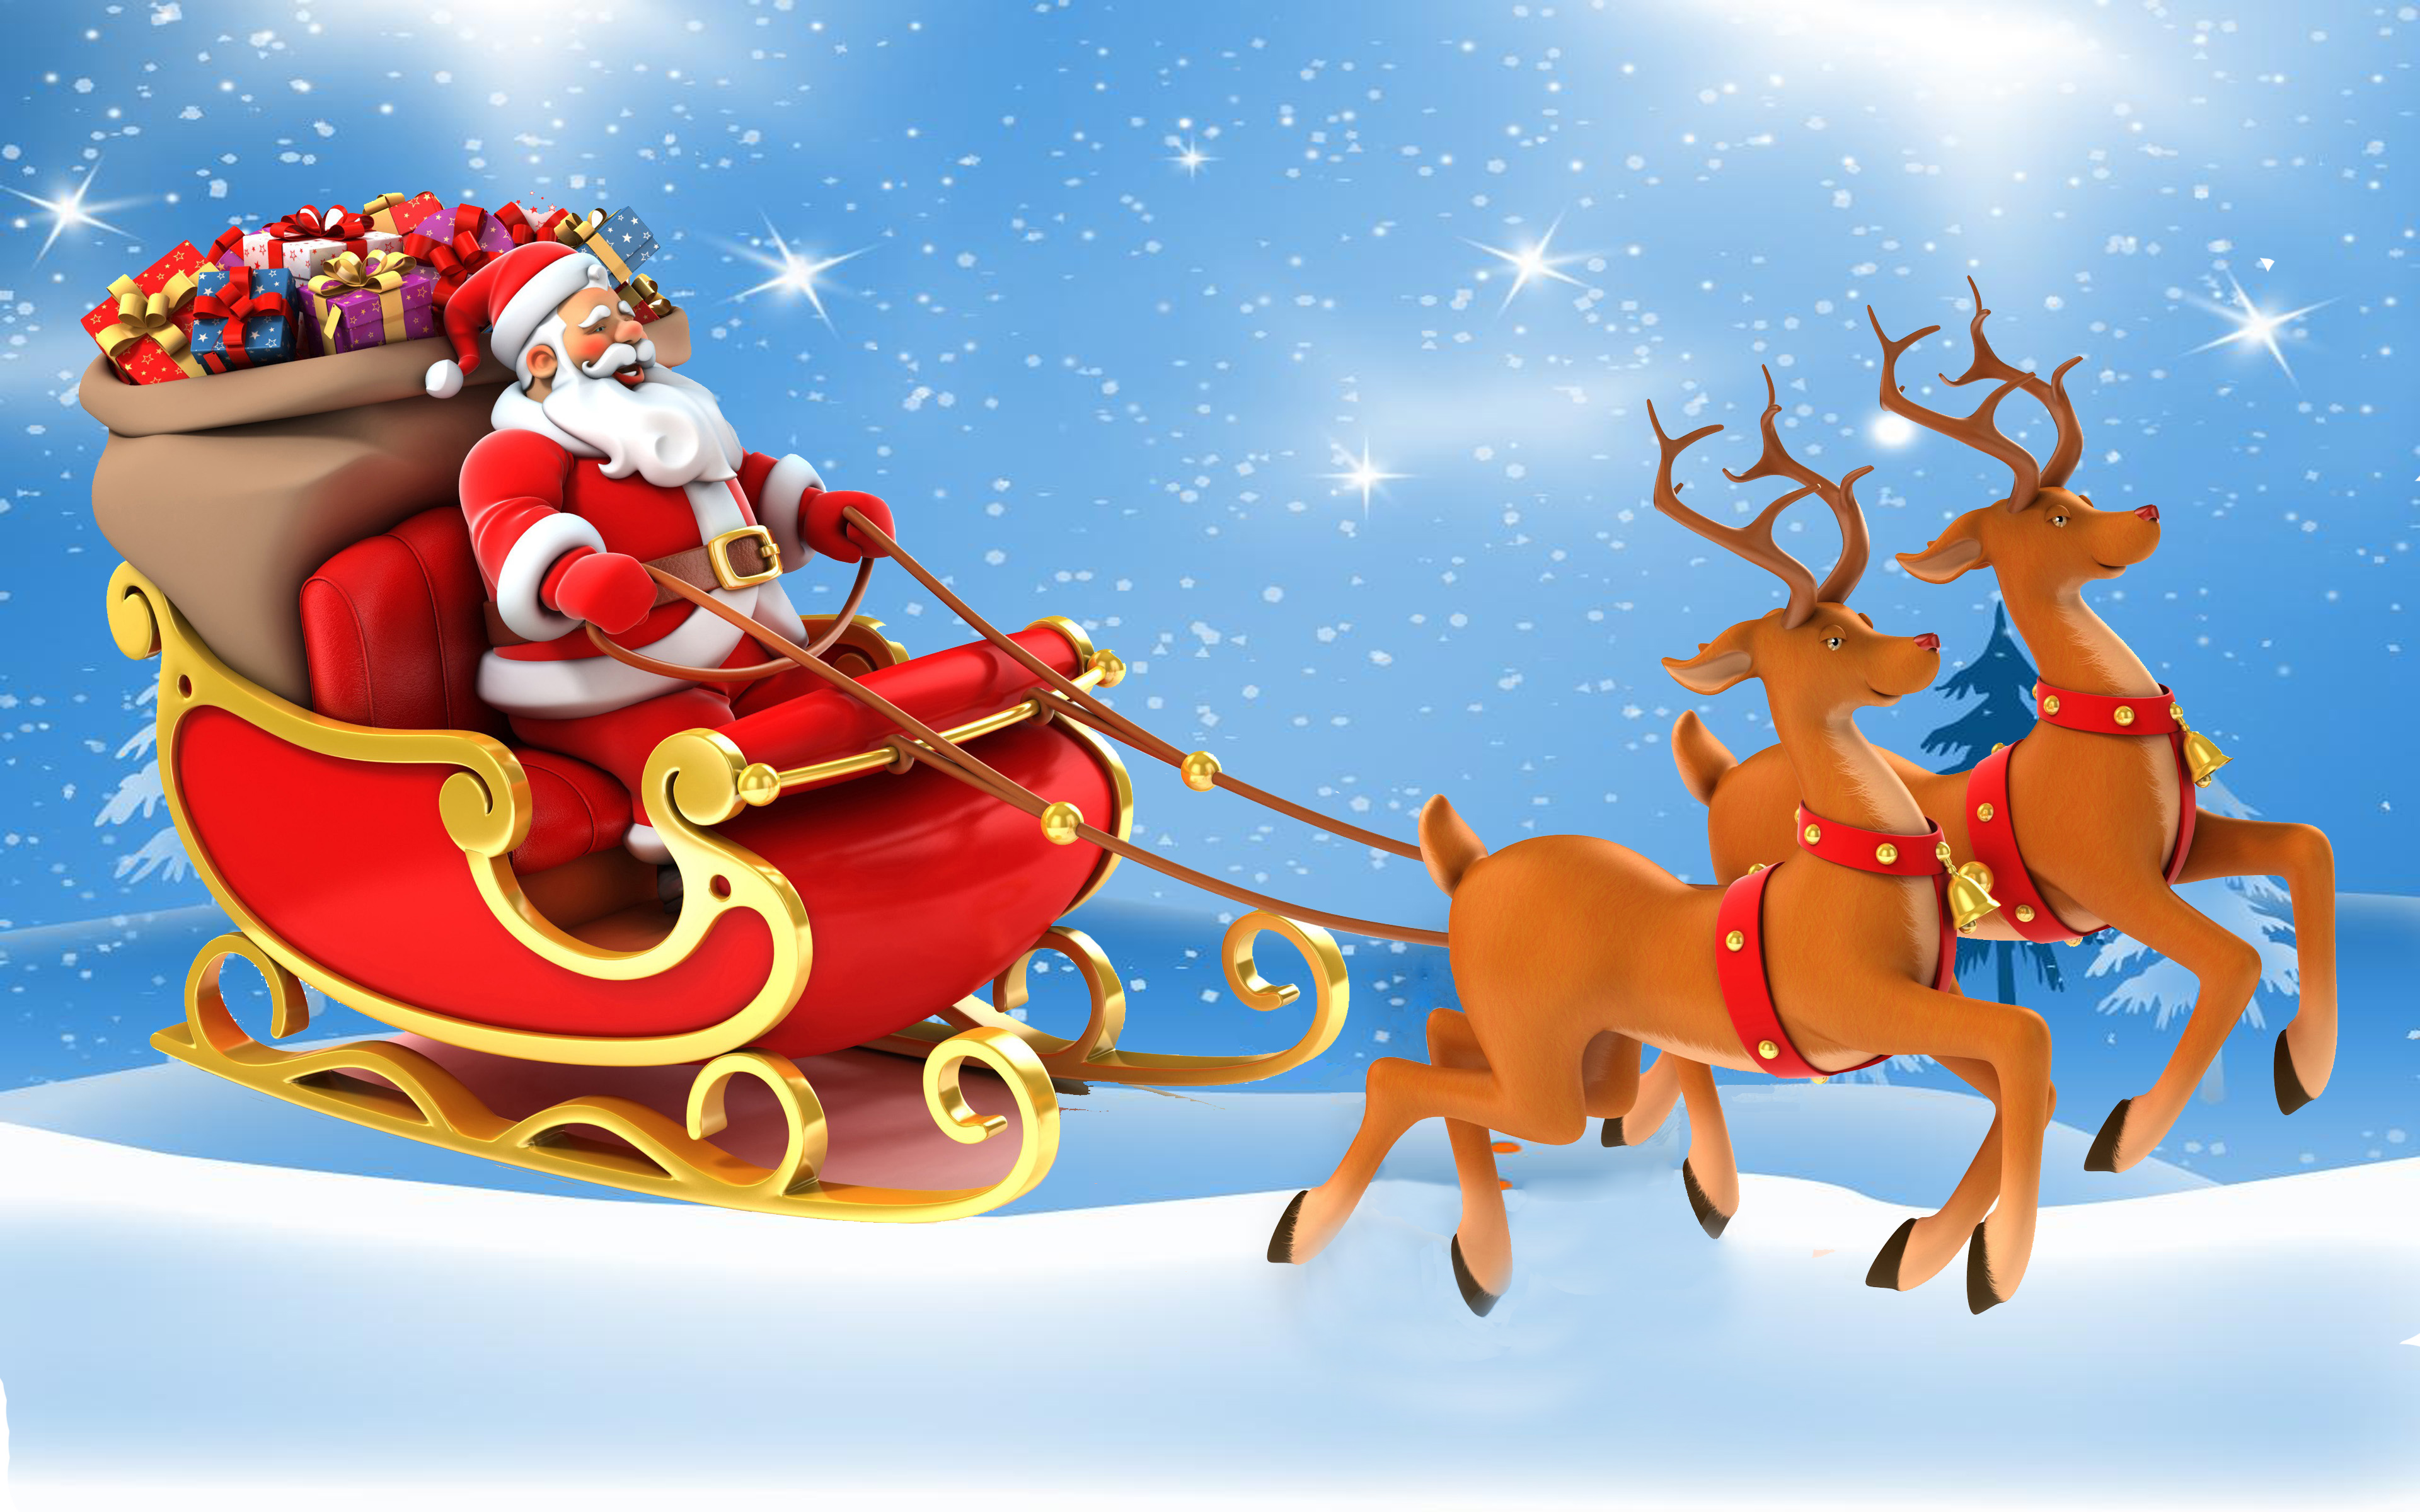 Christmas Postcard Santa Claus In A Sleigh With Gifts